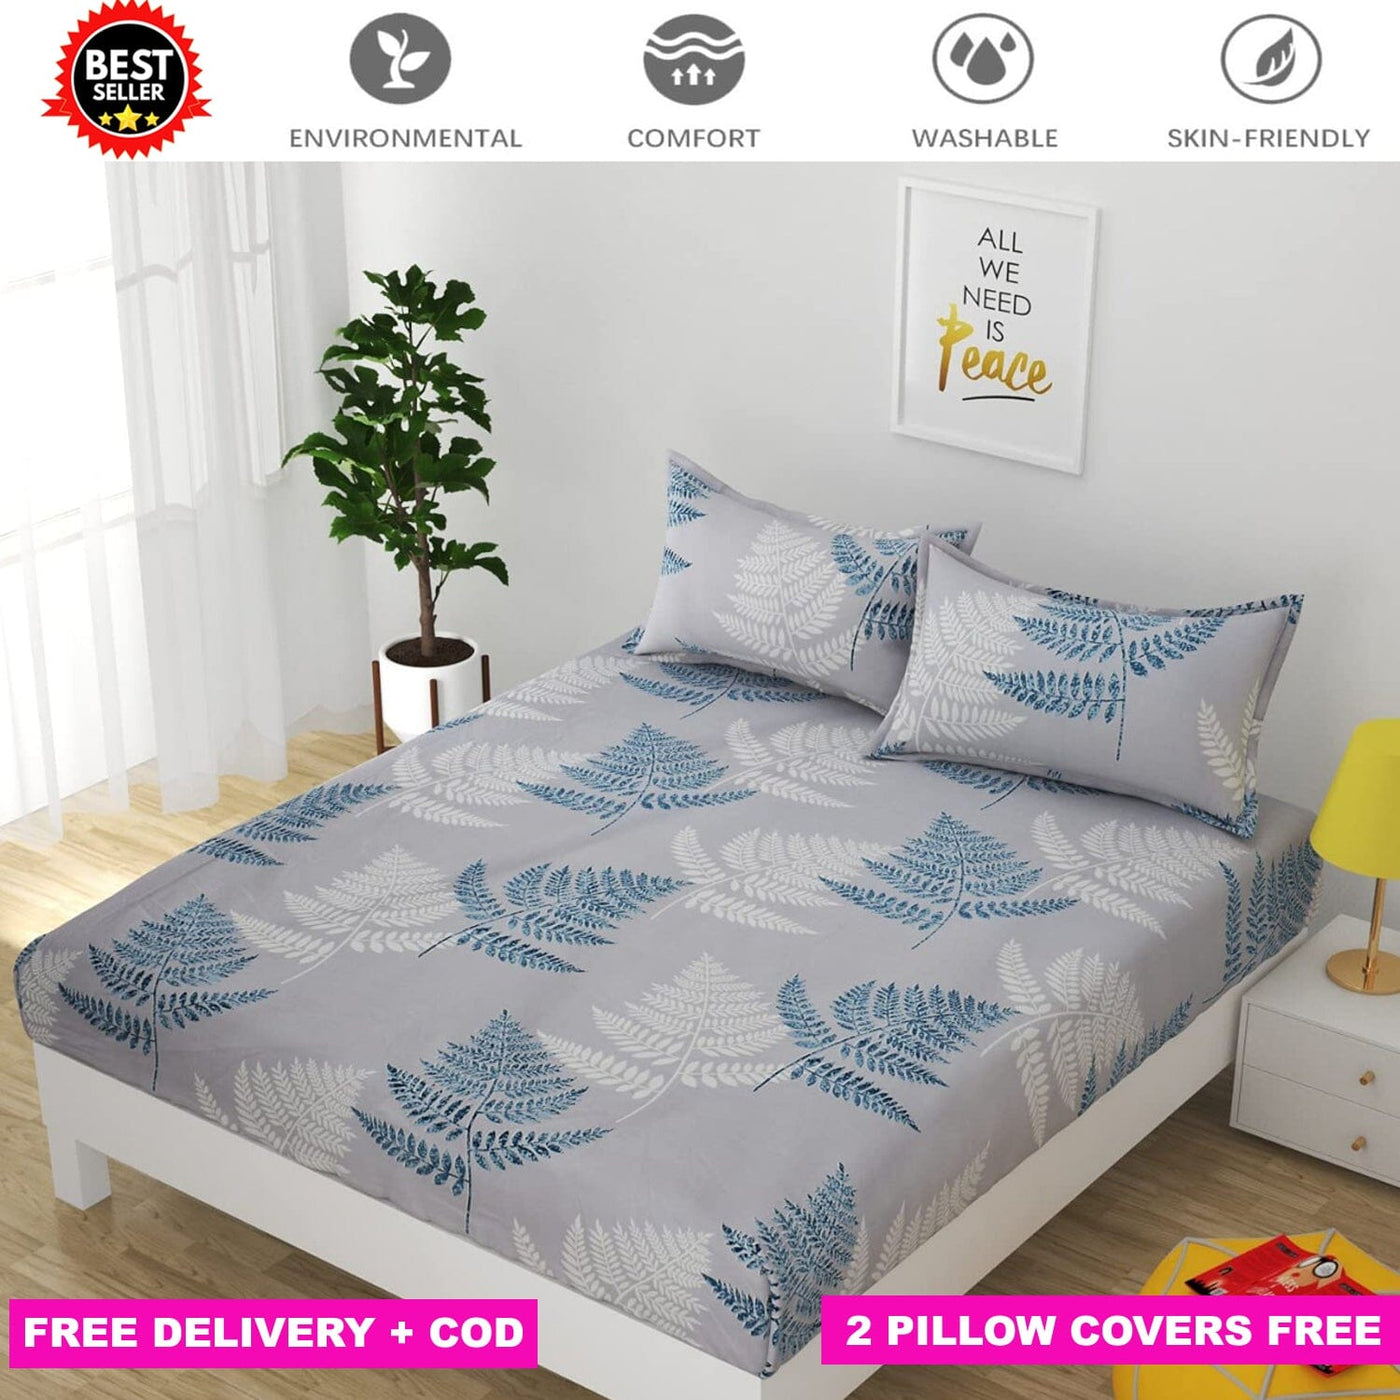 Grey Leaf Full Elastic Fitted Bedsheet with 2 Pillow Covers Bed Sheets Great Happy IN KING SIZE - ₹1299 